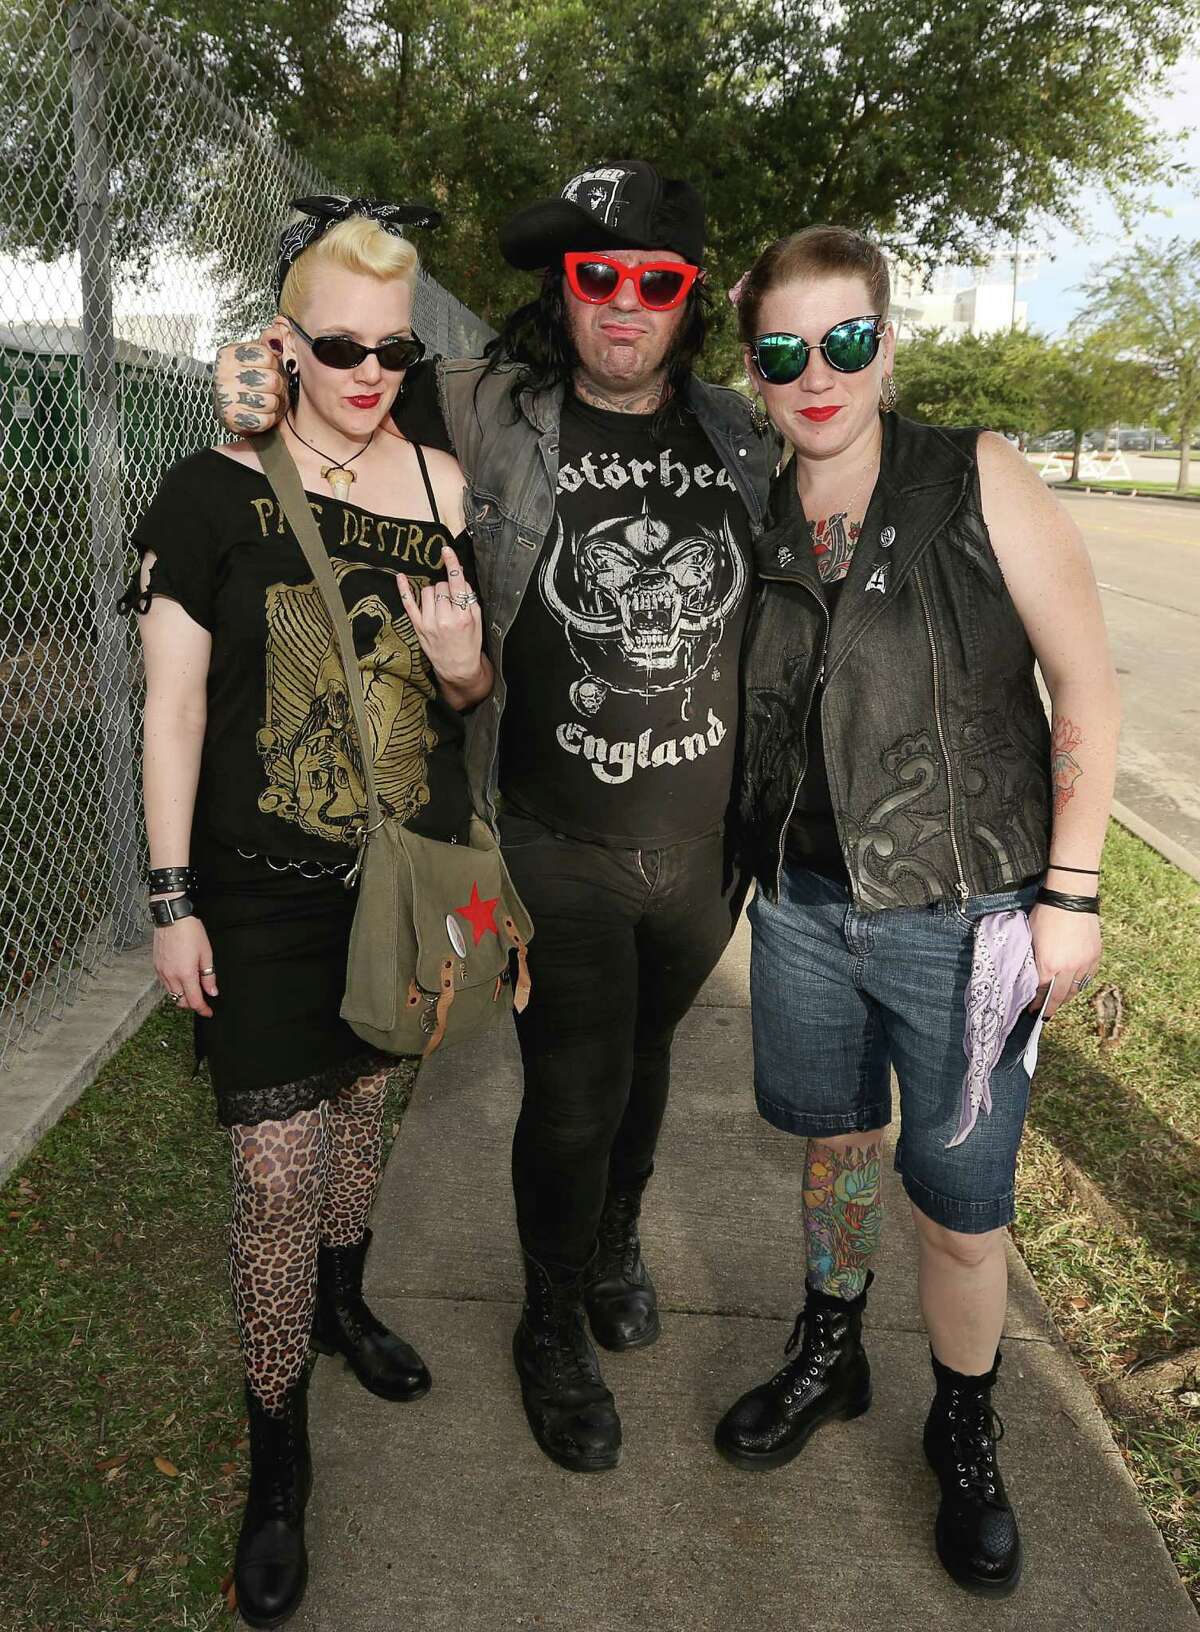 Hard rock and metal fans pose for a photo at Houston Open Air Festival at the NRG Park complex Saturday, Sept. 24, 2016, in Houston.